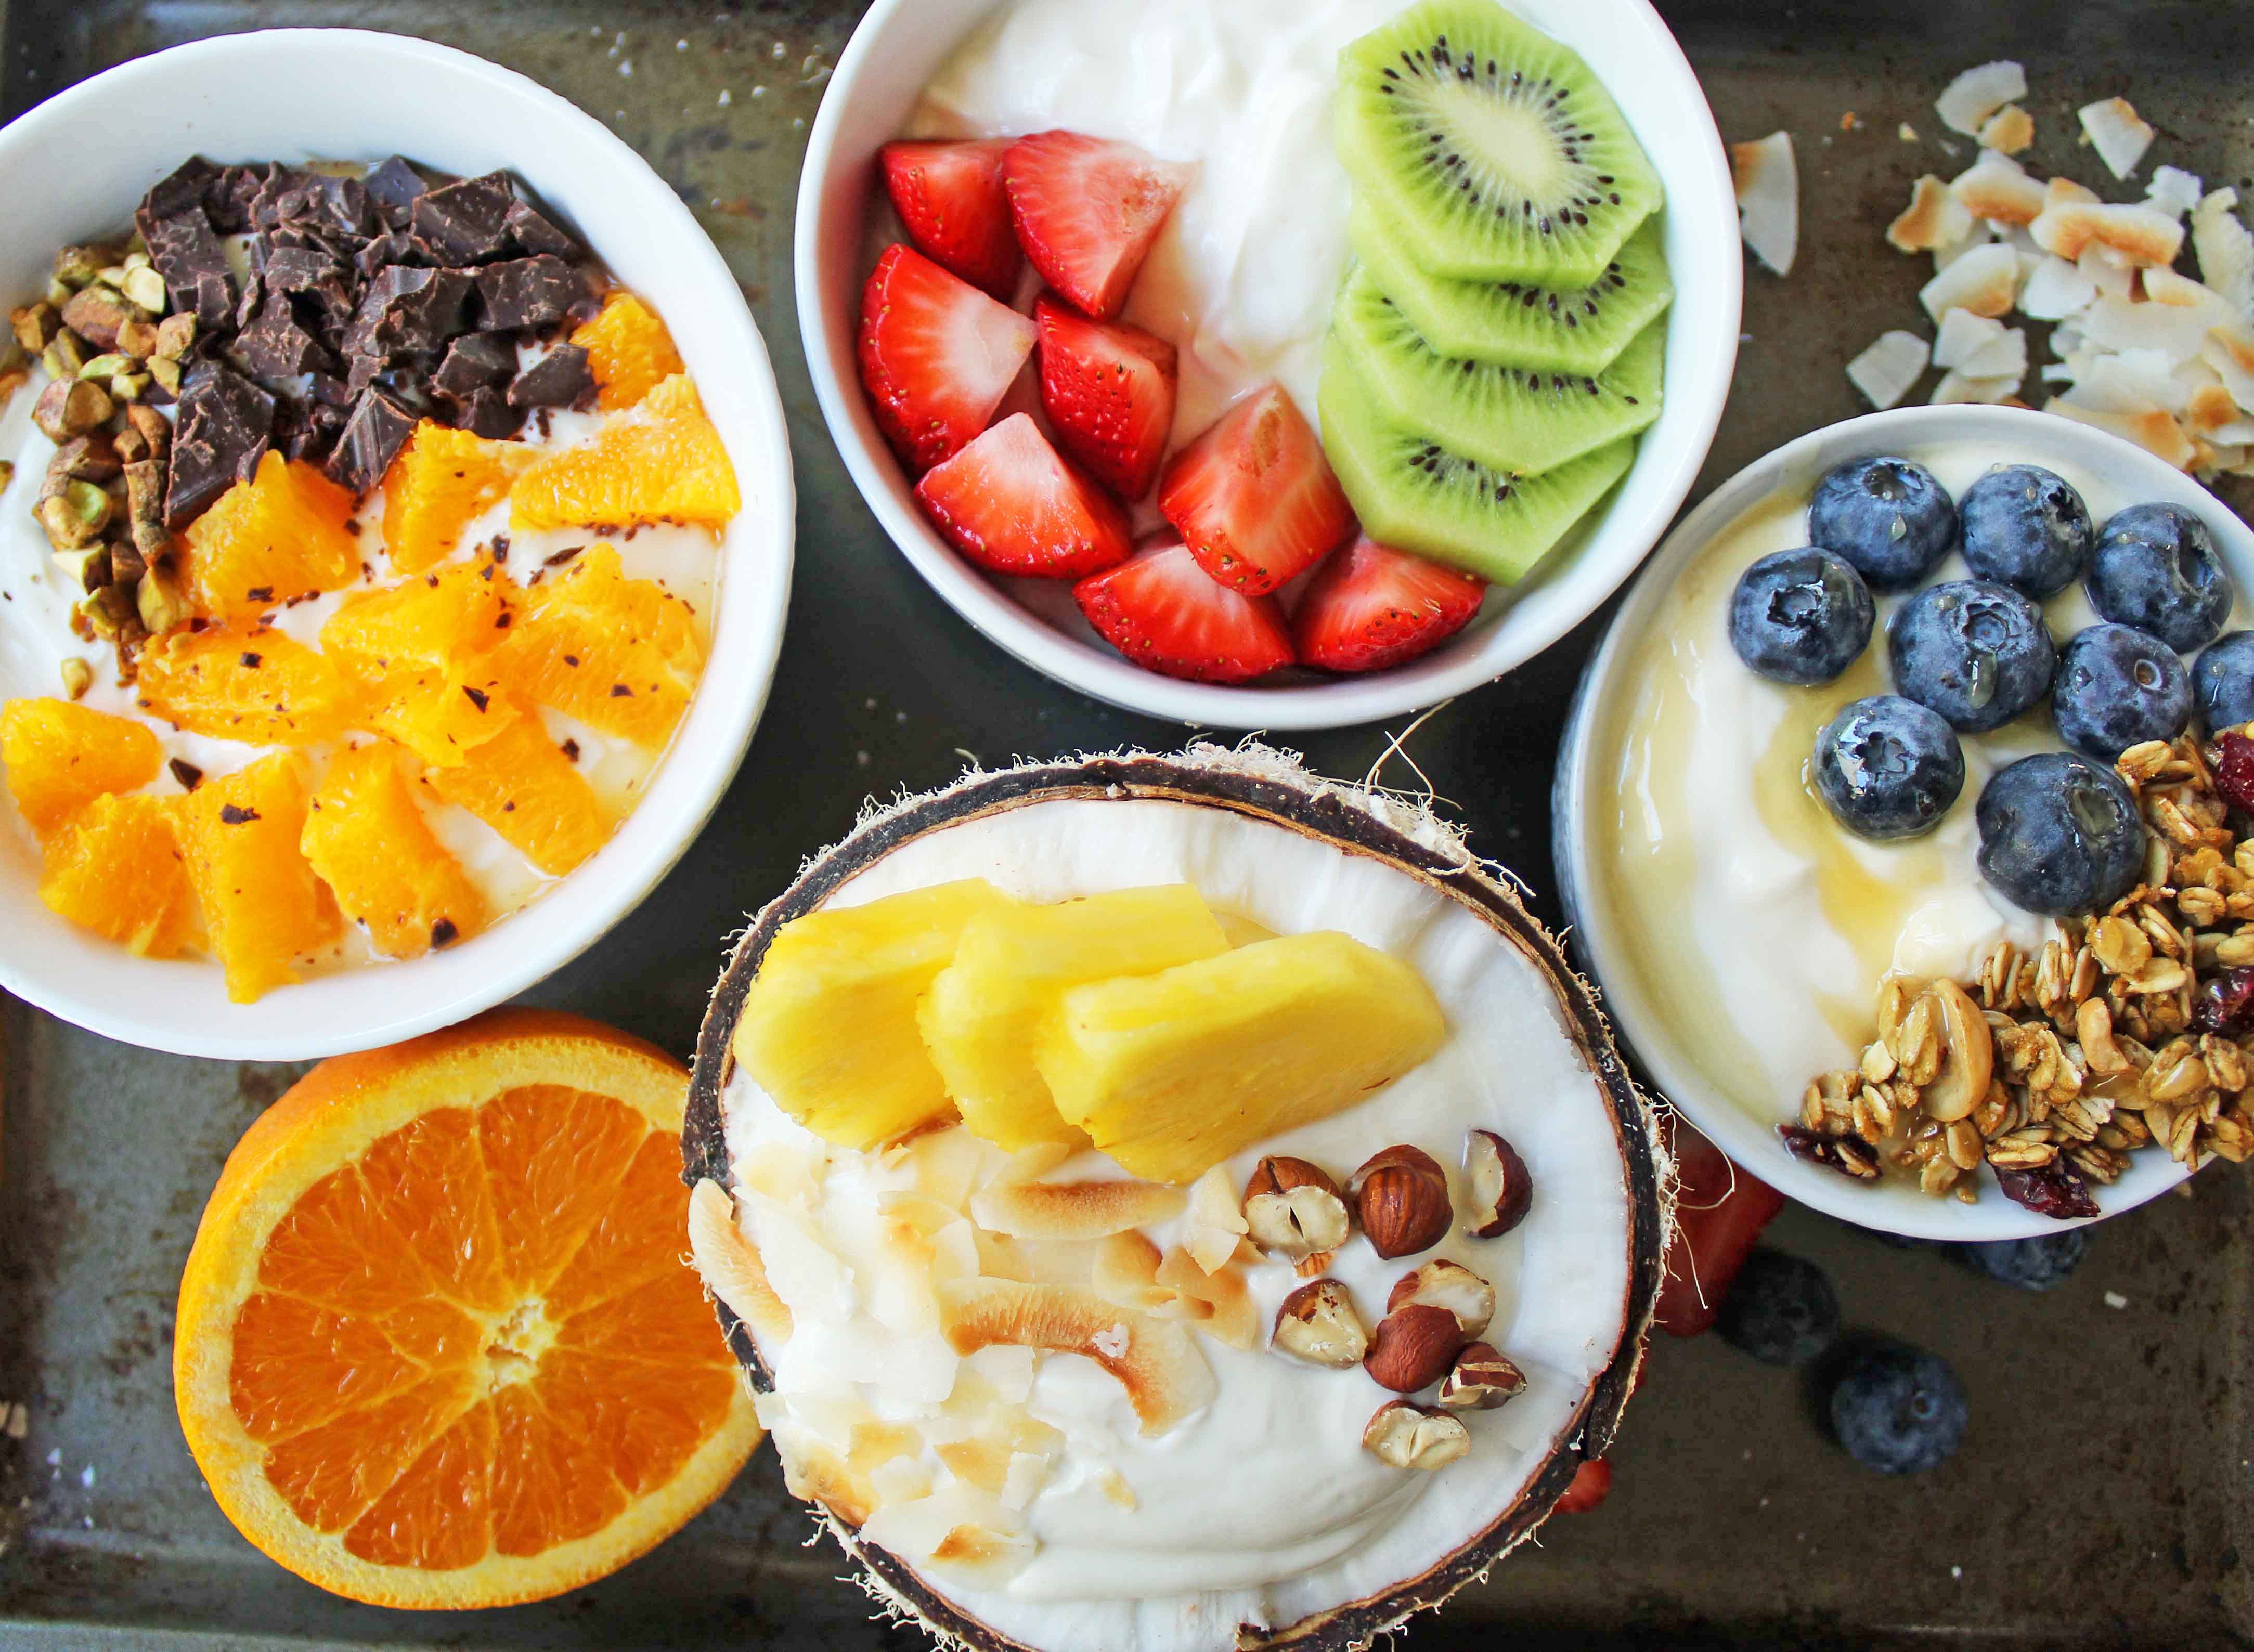 Greek Yogurt Breakfast Bowls with Toppings by Modern Honey. Healthy Greek Yogurt topped with fresh fruits, nuts, and honey. It's a perfect breakfast to start the day!